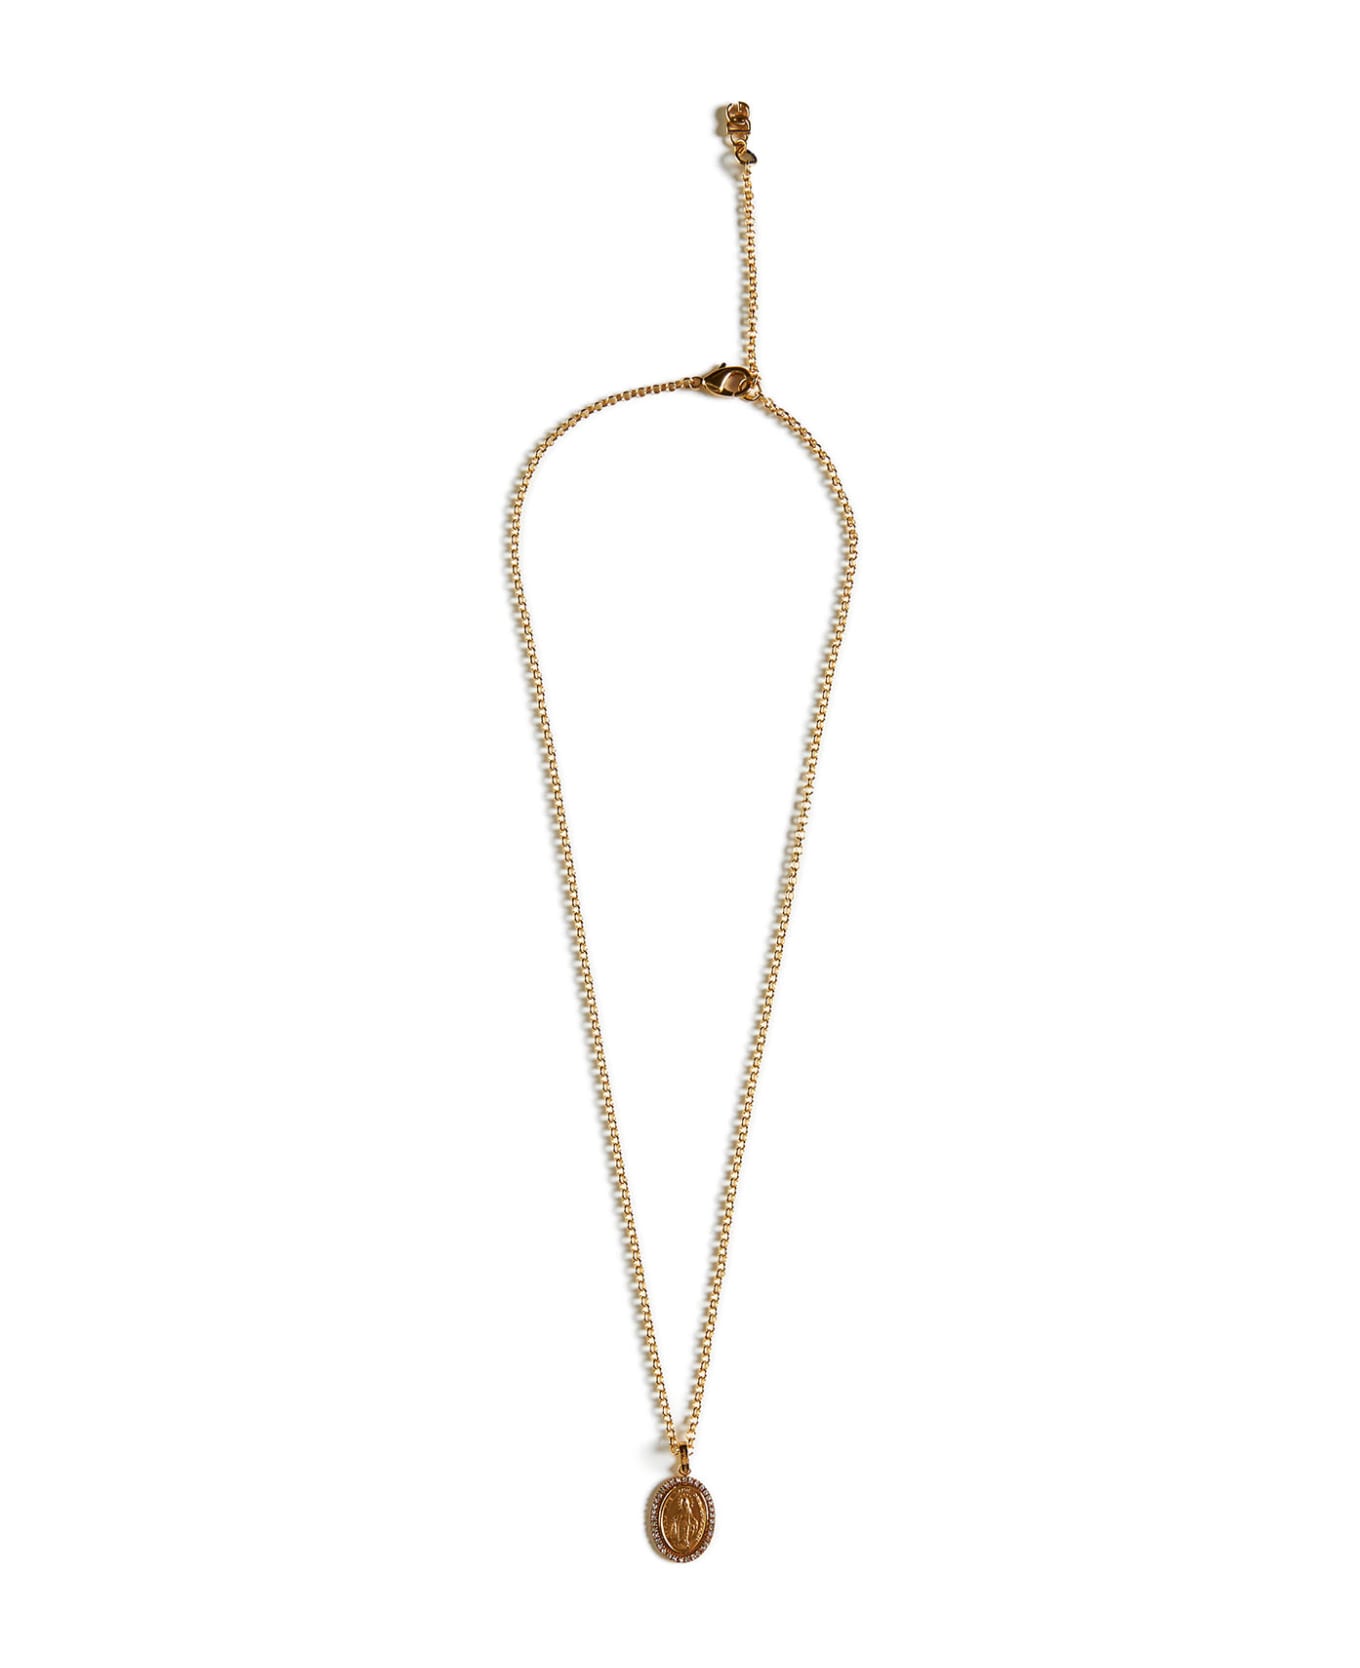 Dolce & Gabbana Necklace With Pendant And Crystals - Gold ネックレス